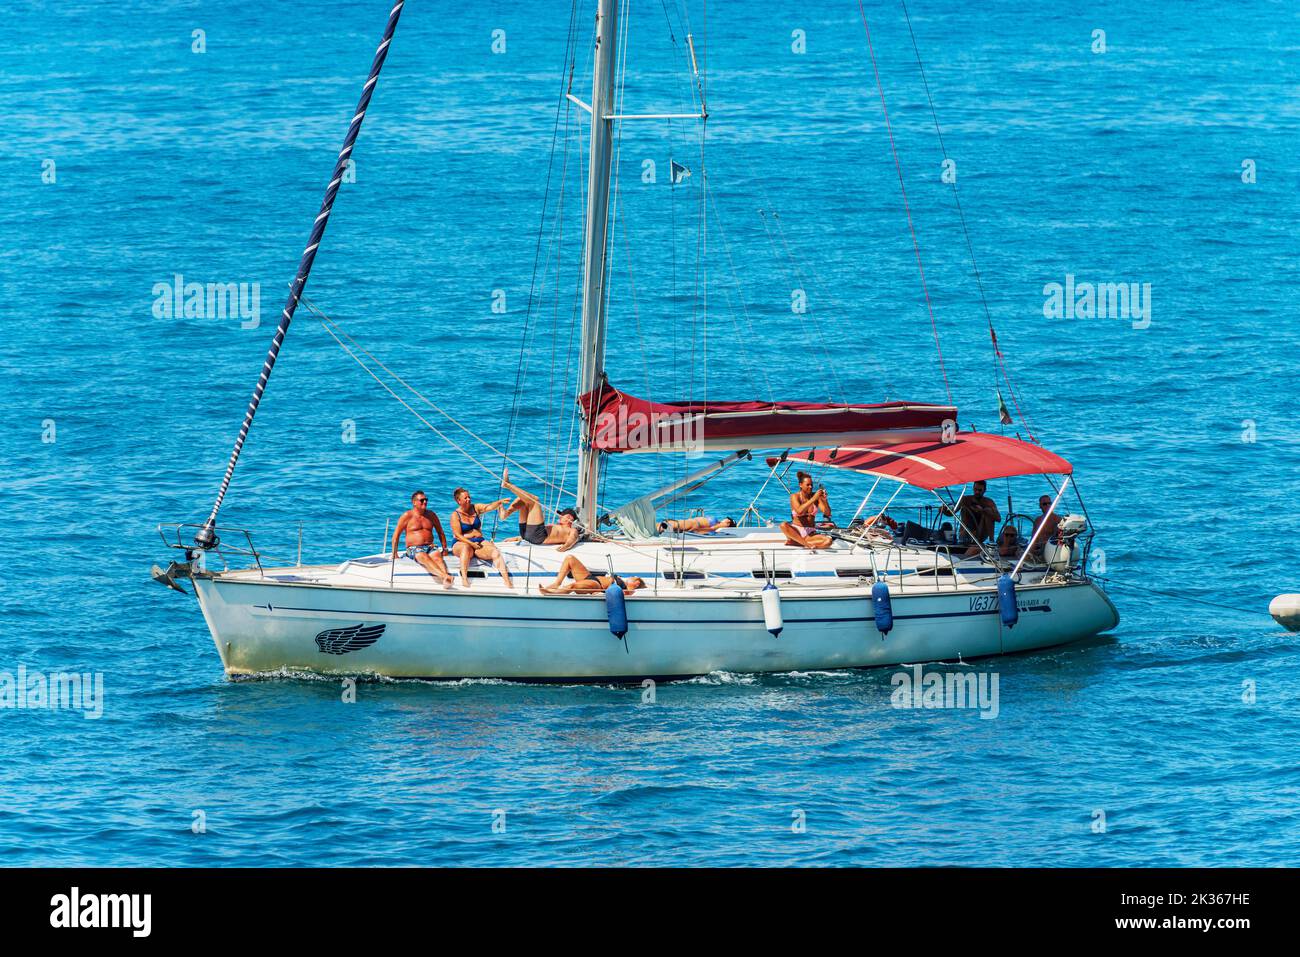 White sailboat with a group of people on board, in front of the Tellaro village, Lerici, Mediterranean Sea, Gulf of La Spezia, Liguria, Italy, Europe. Stock Photo